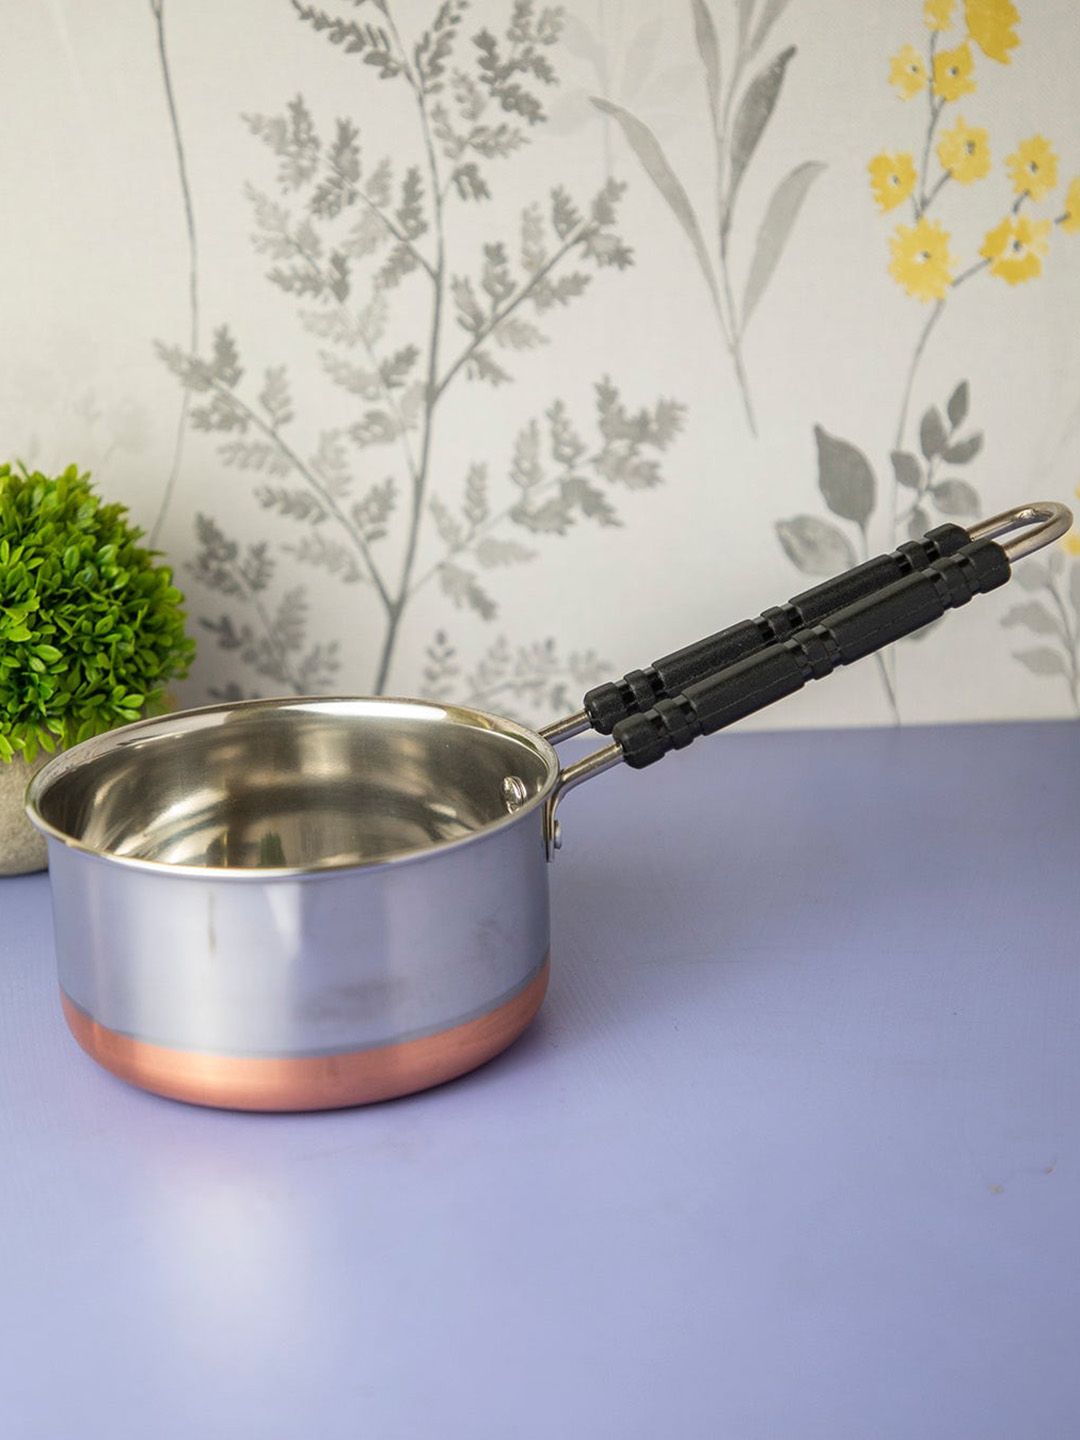 MARKET99 Silver-Colored Saucepan With Copper Plated Bottom Price in India